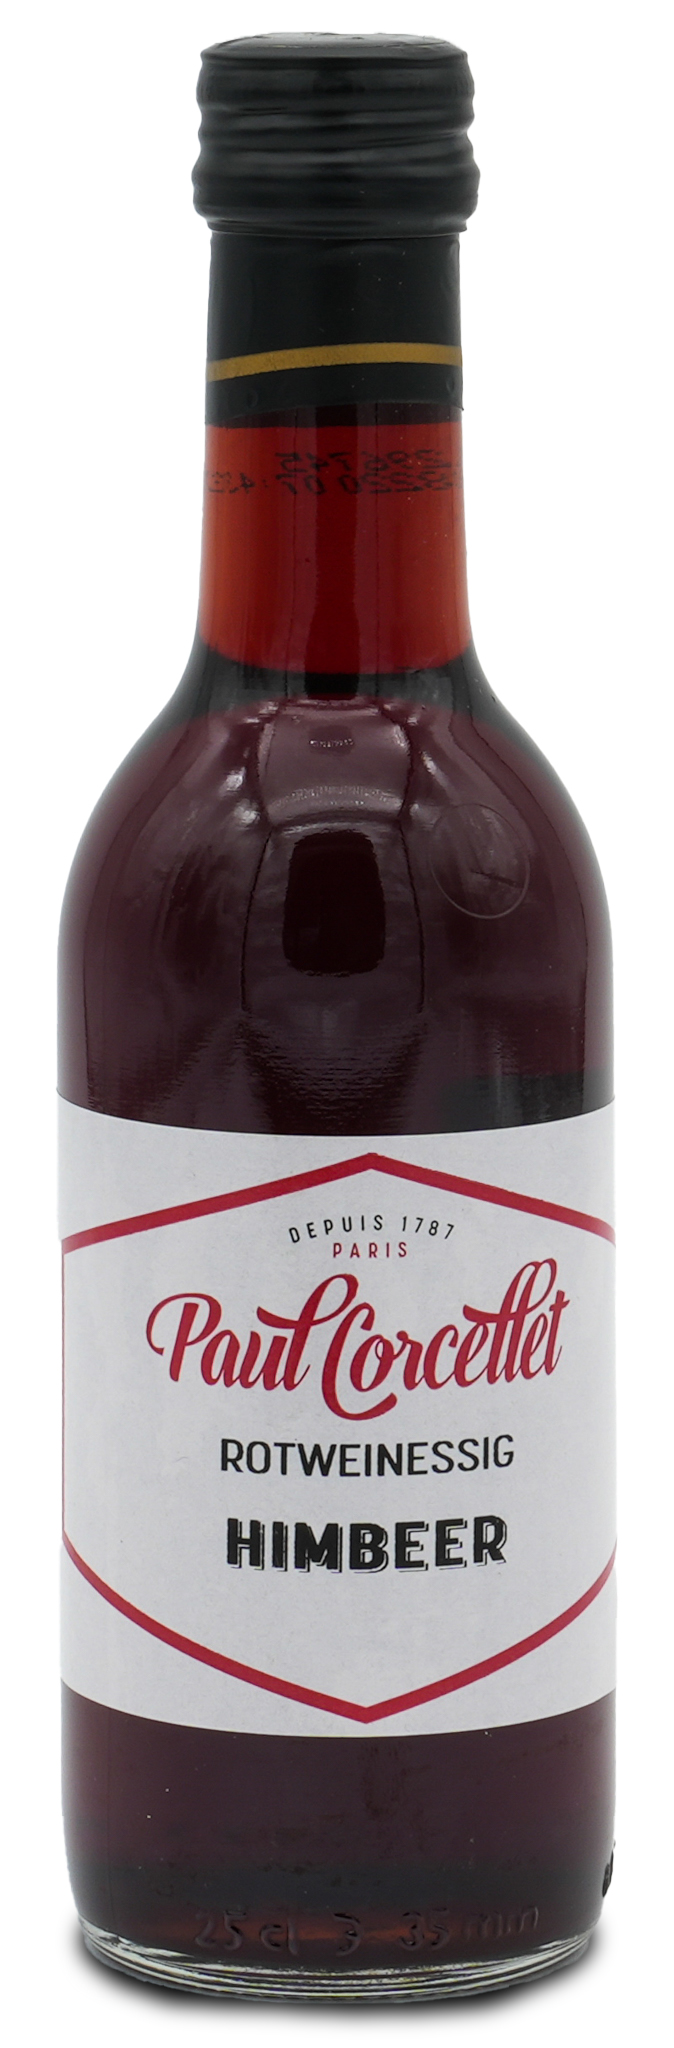 Rotweinessig Himbeer | Paul Corcellet | 250ml